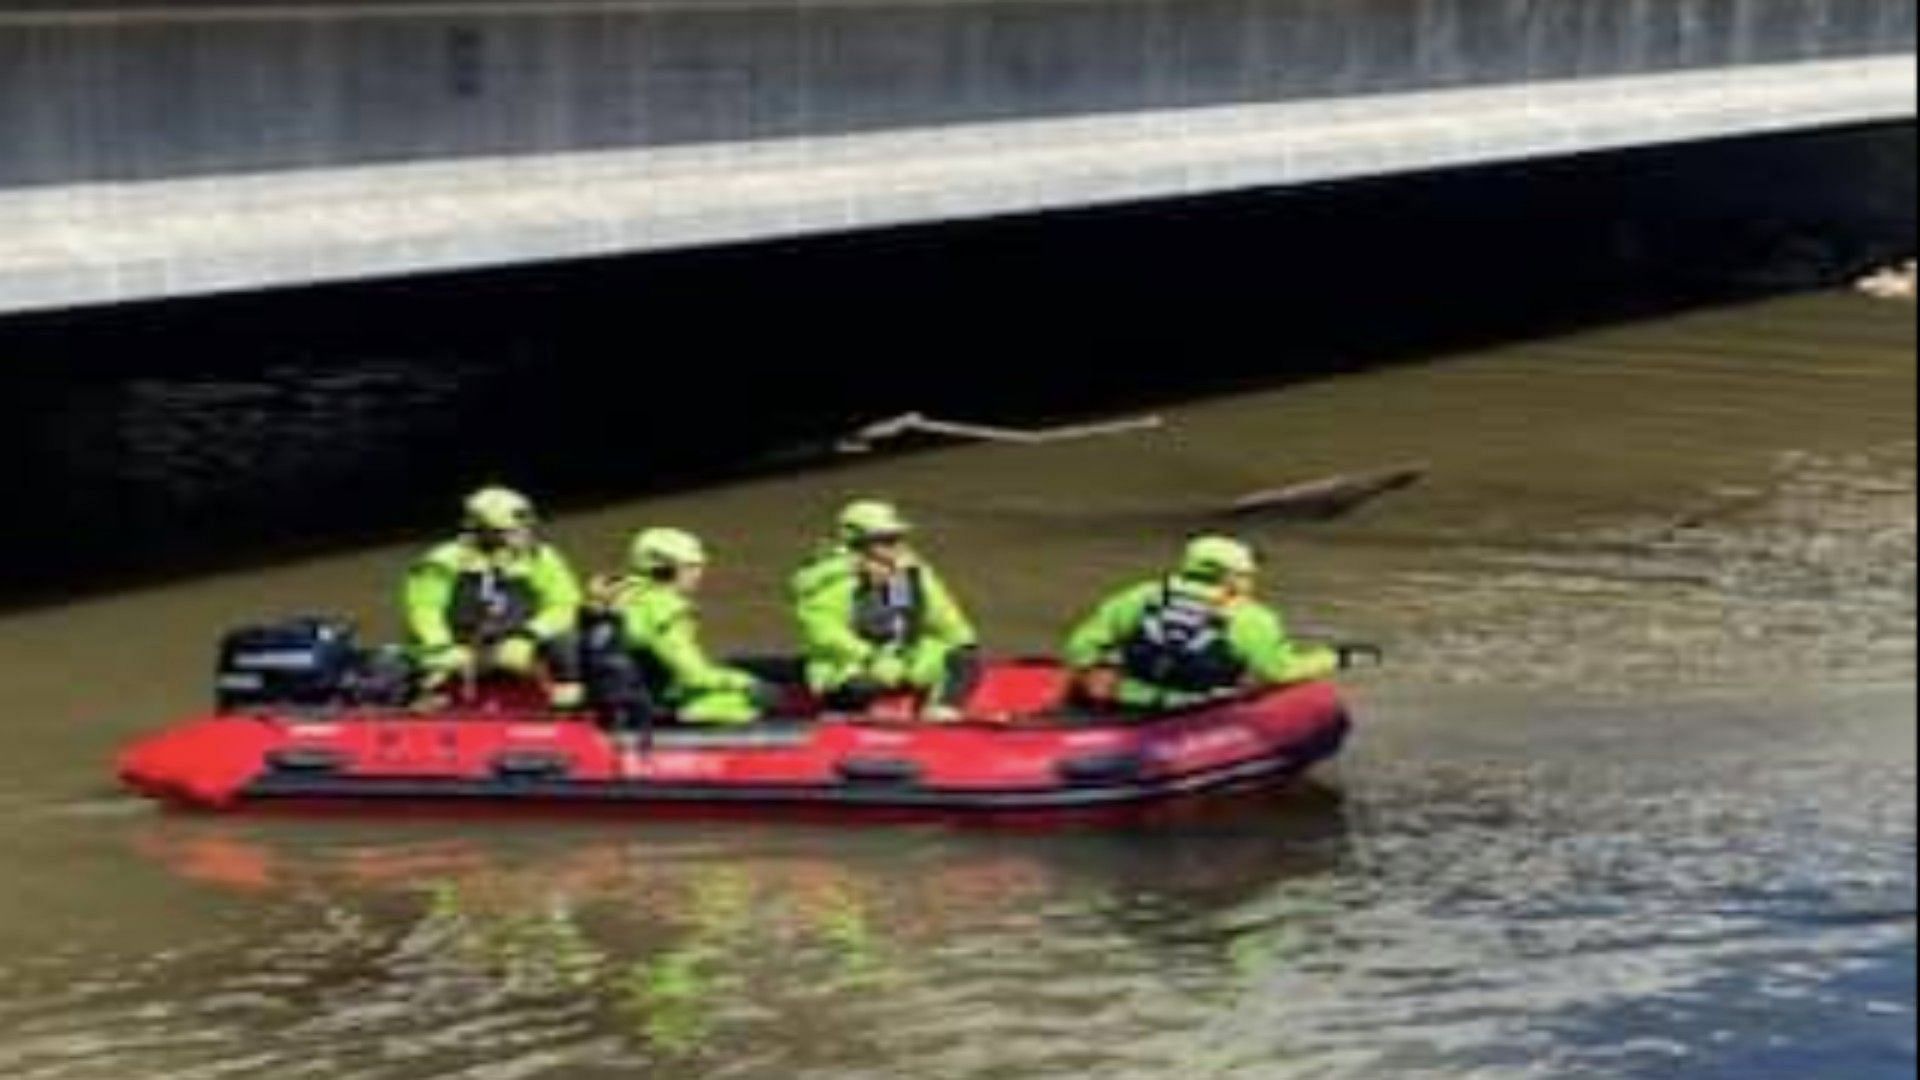 Officials search for missing 6-year-old in Chester Creek (Image via Delaware County Emergency Services 911/Facebook)